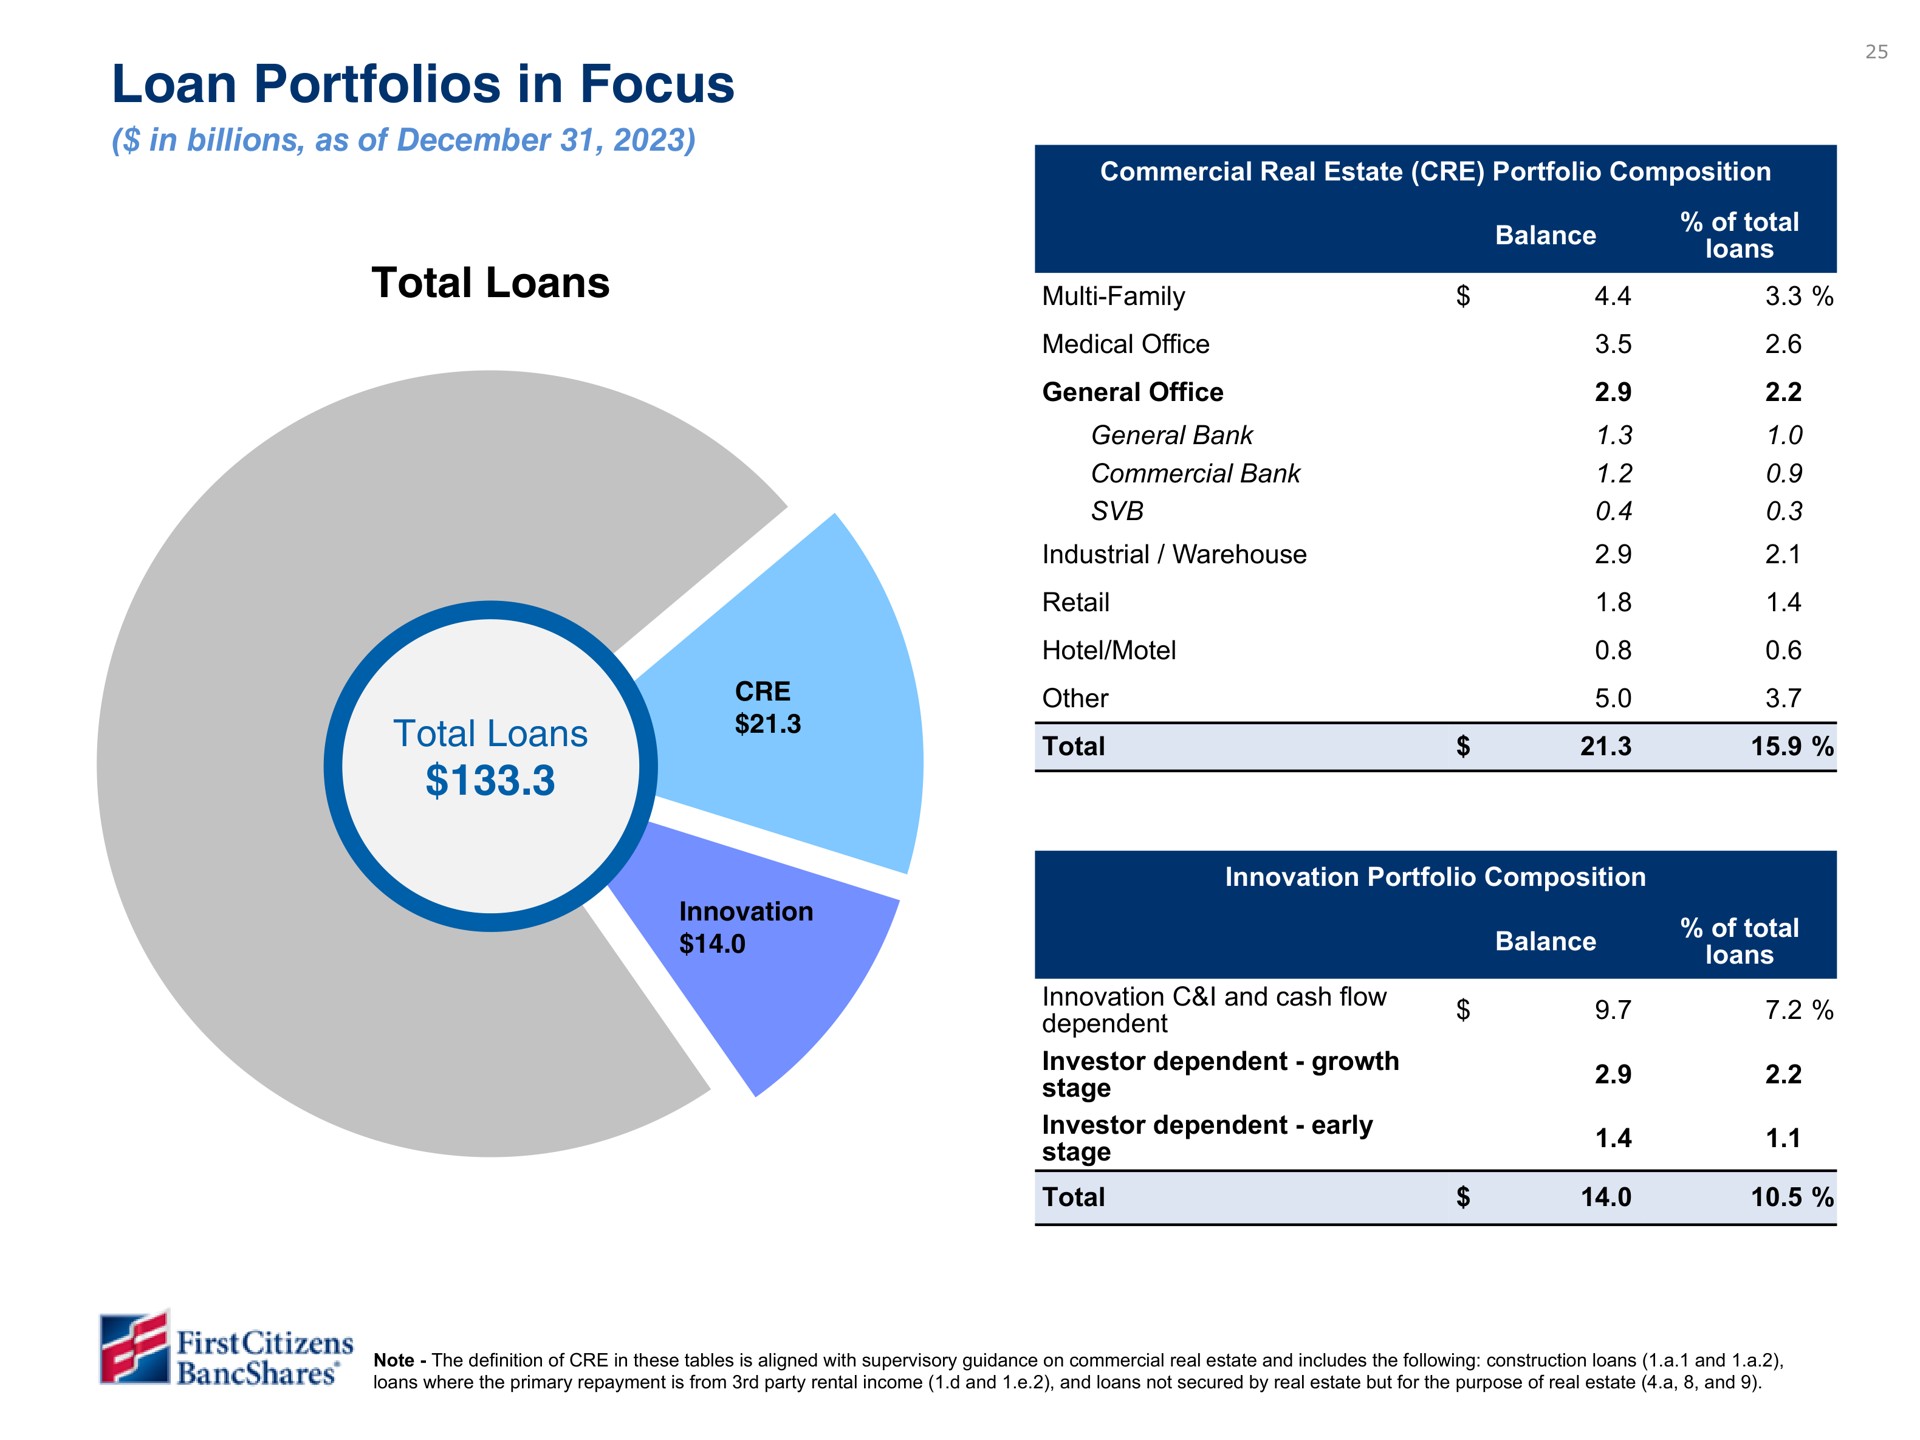 loan portfolios in focus total loans total loans vale family other | First Citizens BancShares